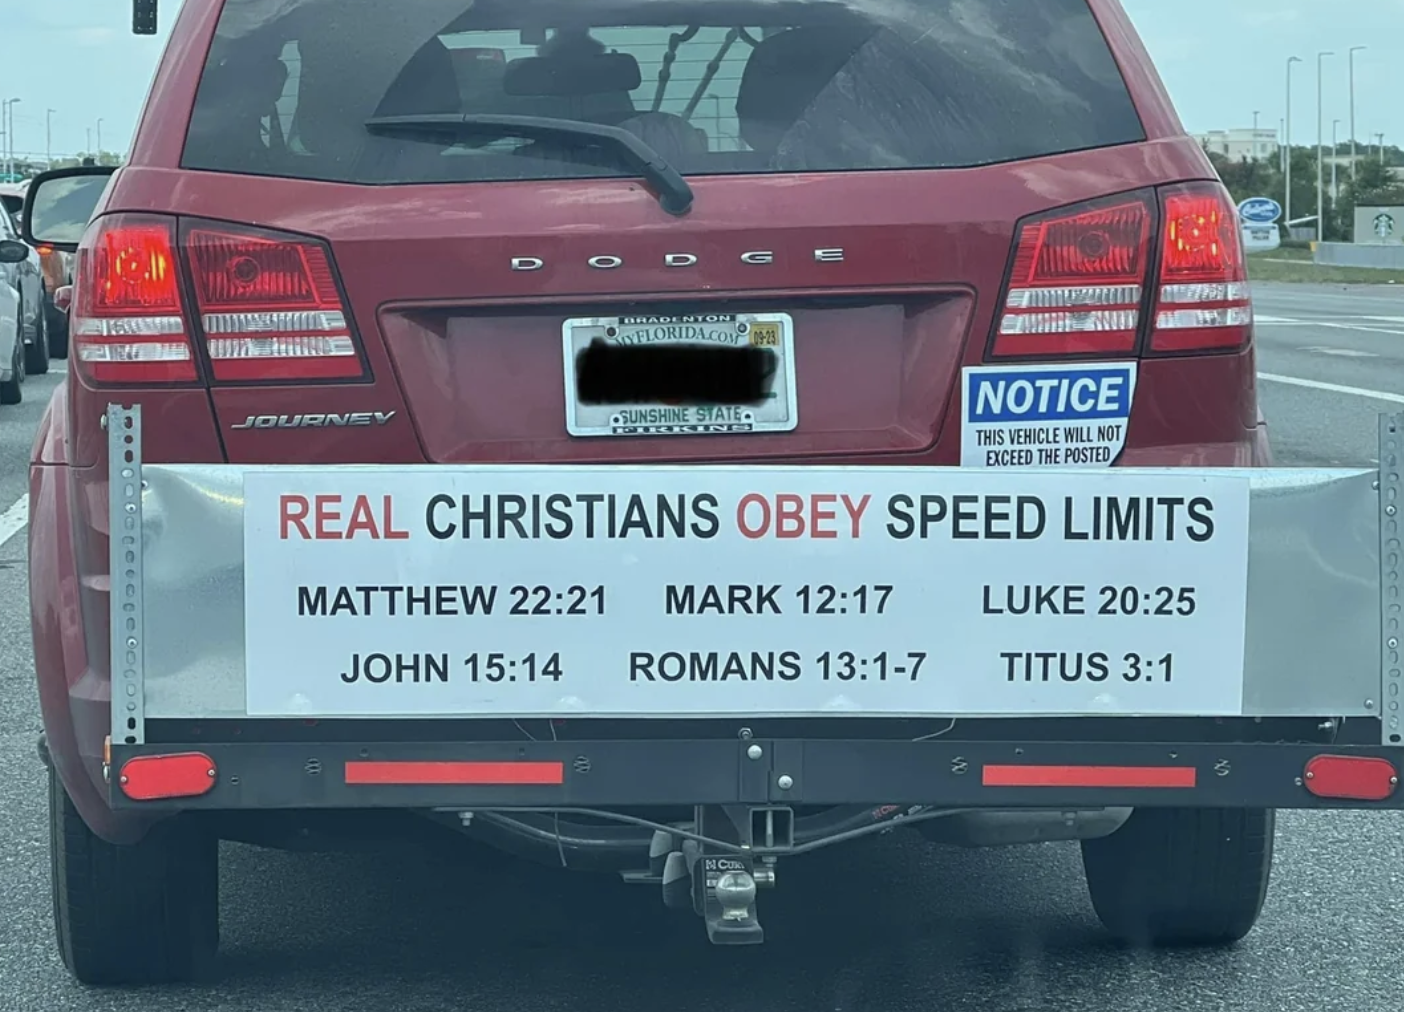 subaru outback - Od Journey Sum Notice This Vehicle Will Not Exceed The Posted Real Christians Obey Speed Limits Matthew Mark Luke John Romans 7 Titus